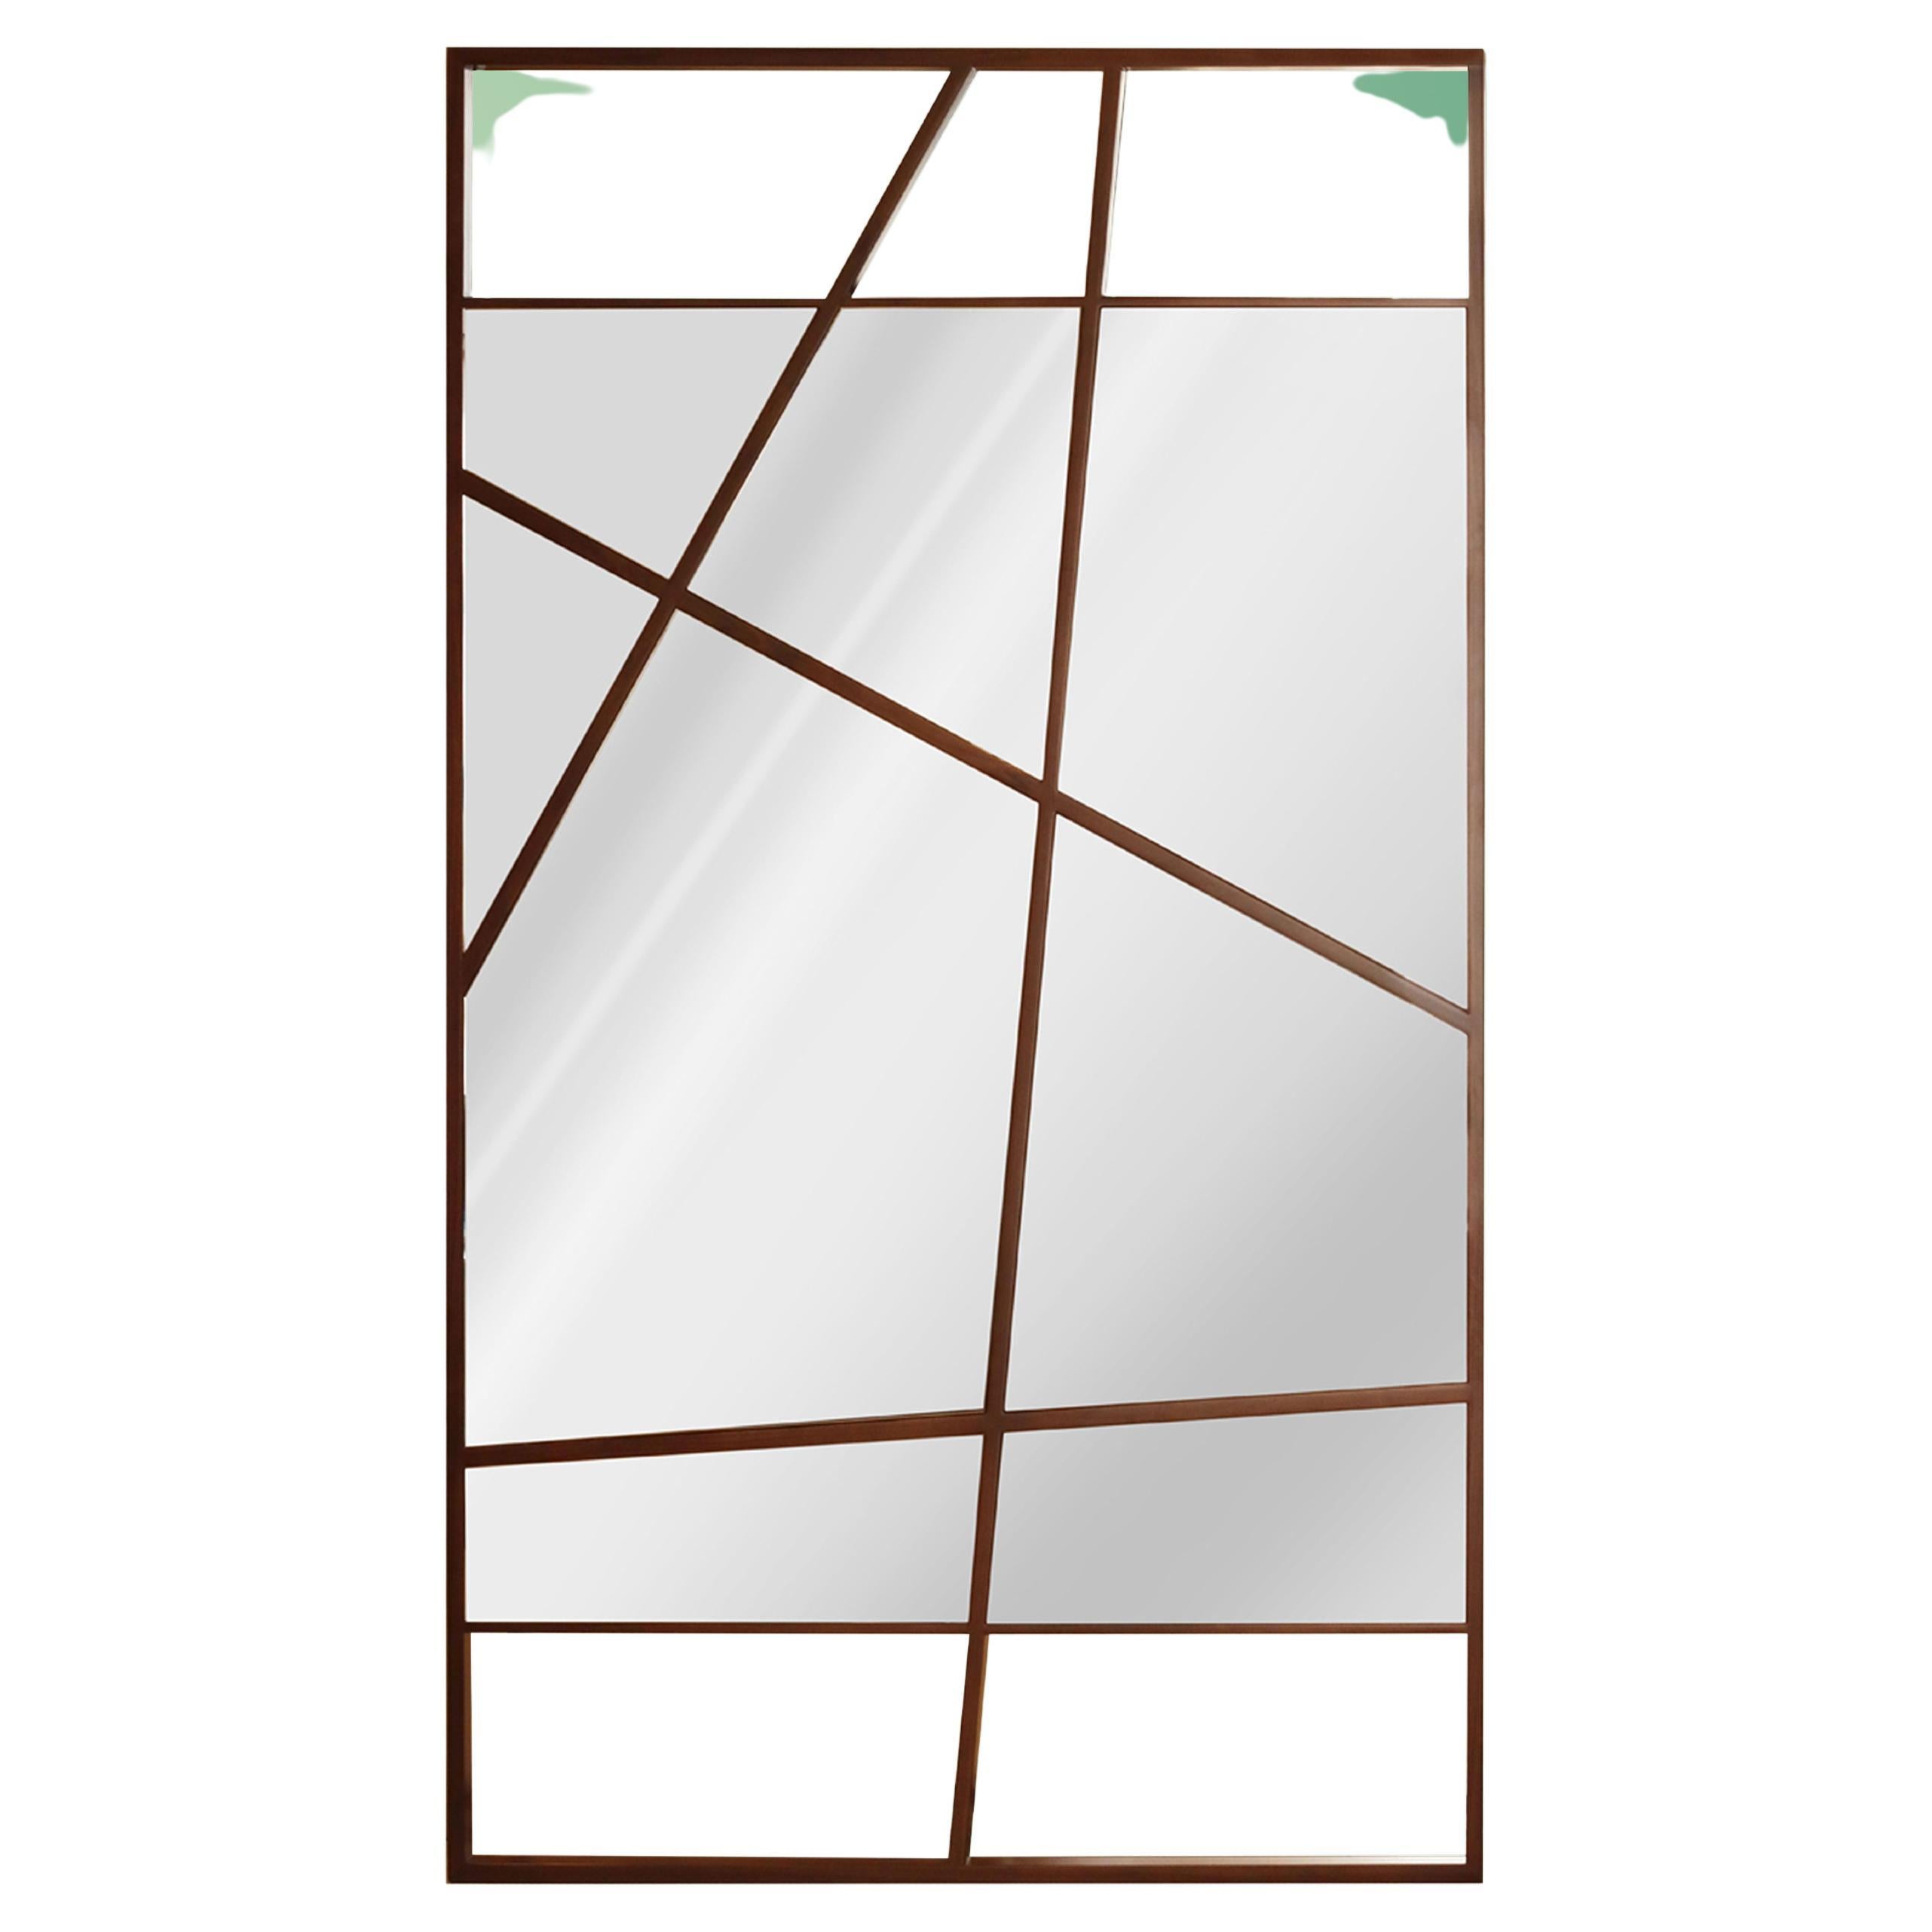 The Lucian mirror is a striking mirror made from multiple pieces of mirror divided by walnut strips framed inside a rectangular shape. This mirror can be left leaning on the wall or hung with a french cleat (provided by us) and is versatile, working